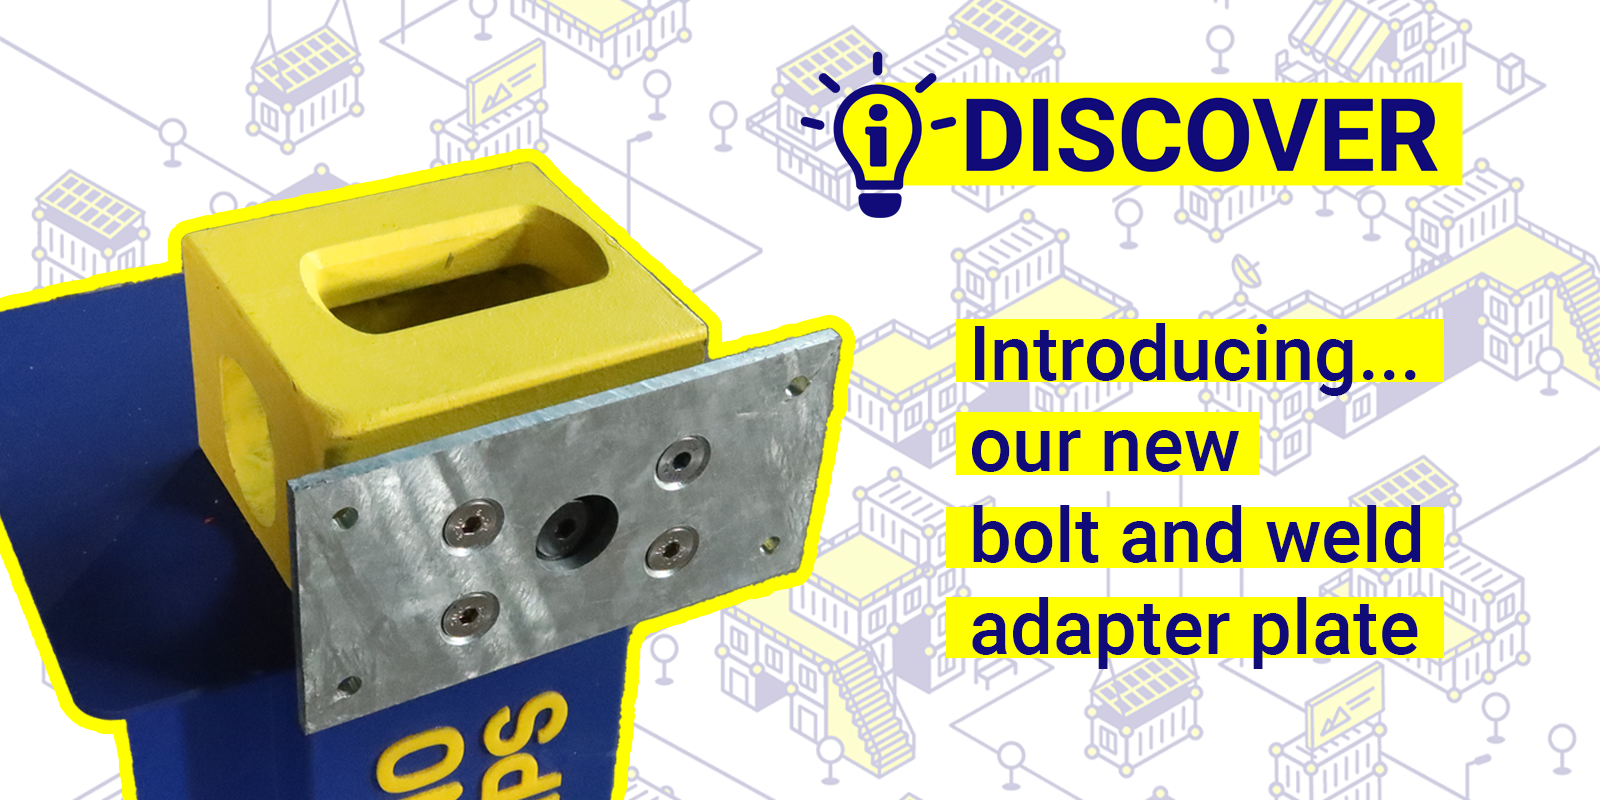 Introducing our new bolt and weld adapter plate